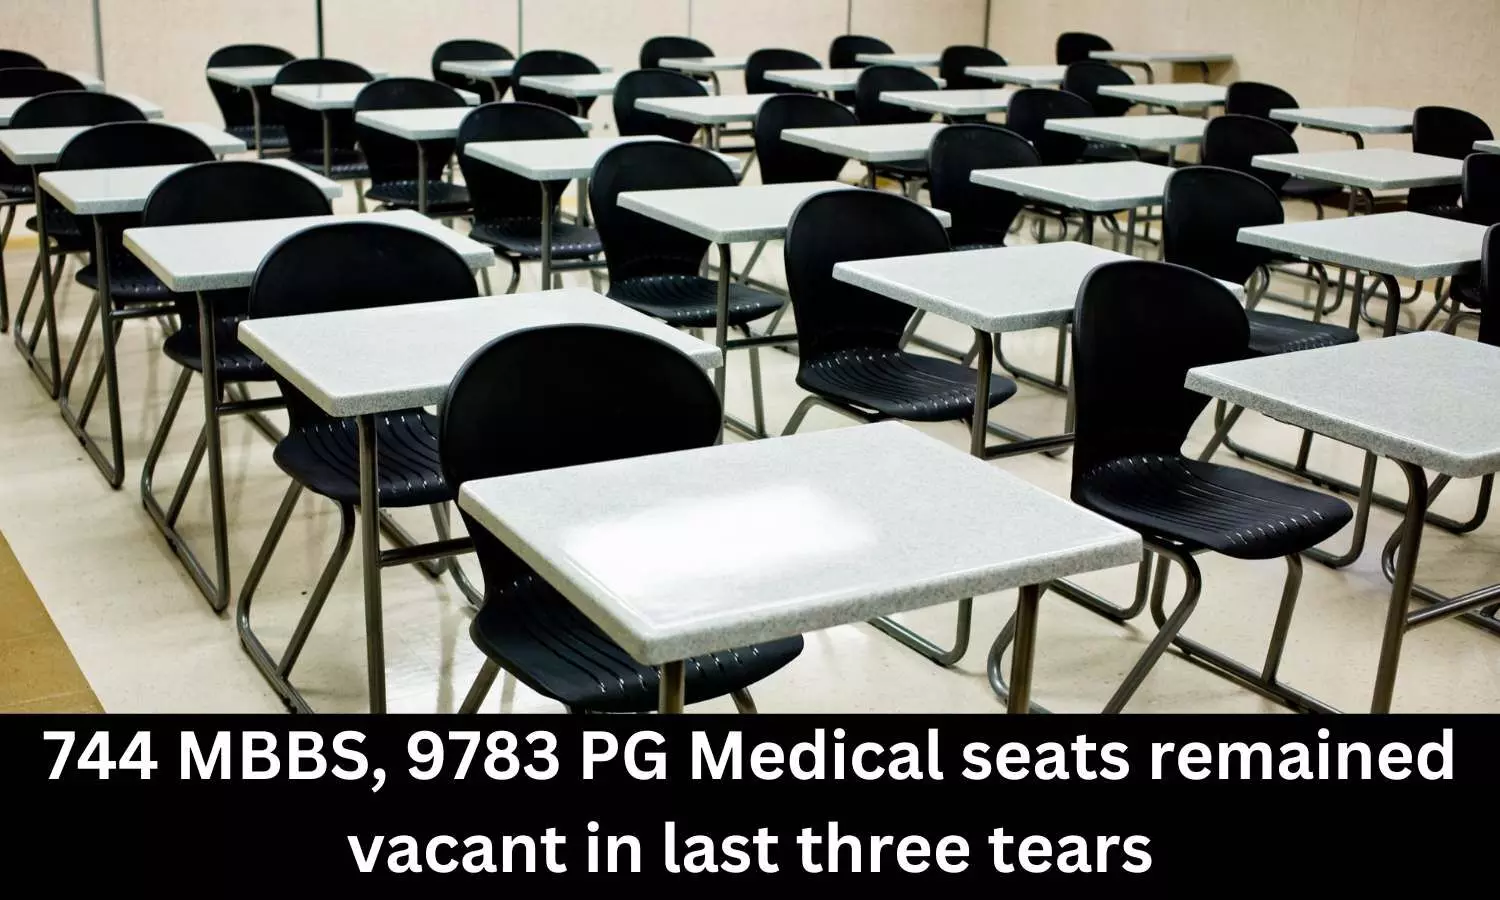 9783 PG Medical seats, 744 MBBS remained vacant in last three tears: Health Minister Mansukh Mandaviya informs Parliament